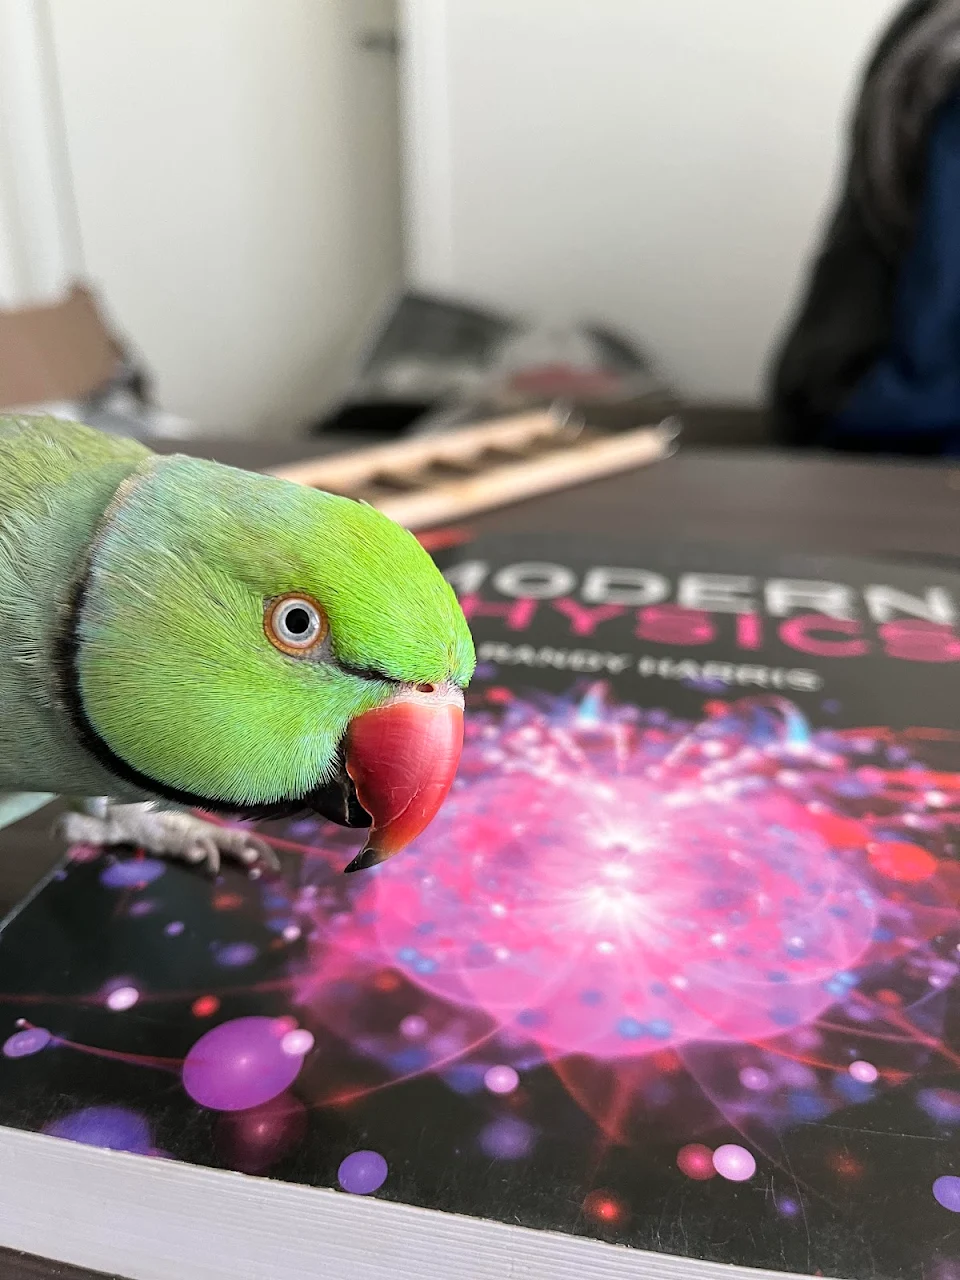 My parrot claims it’s his book